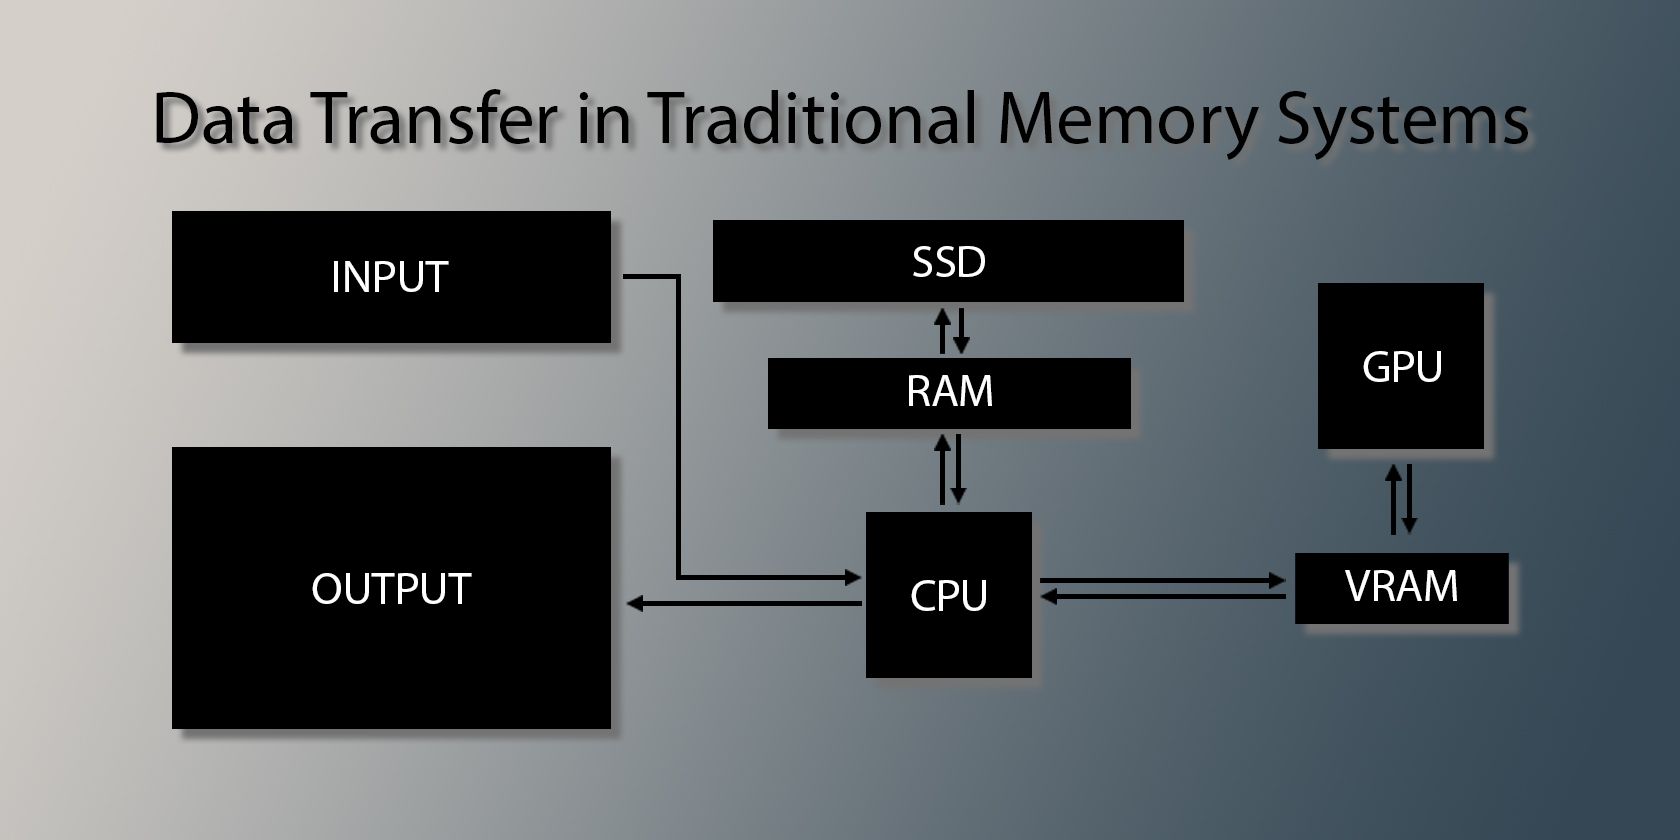 Data Transfer in Traditional Memory Systems